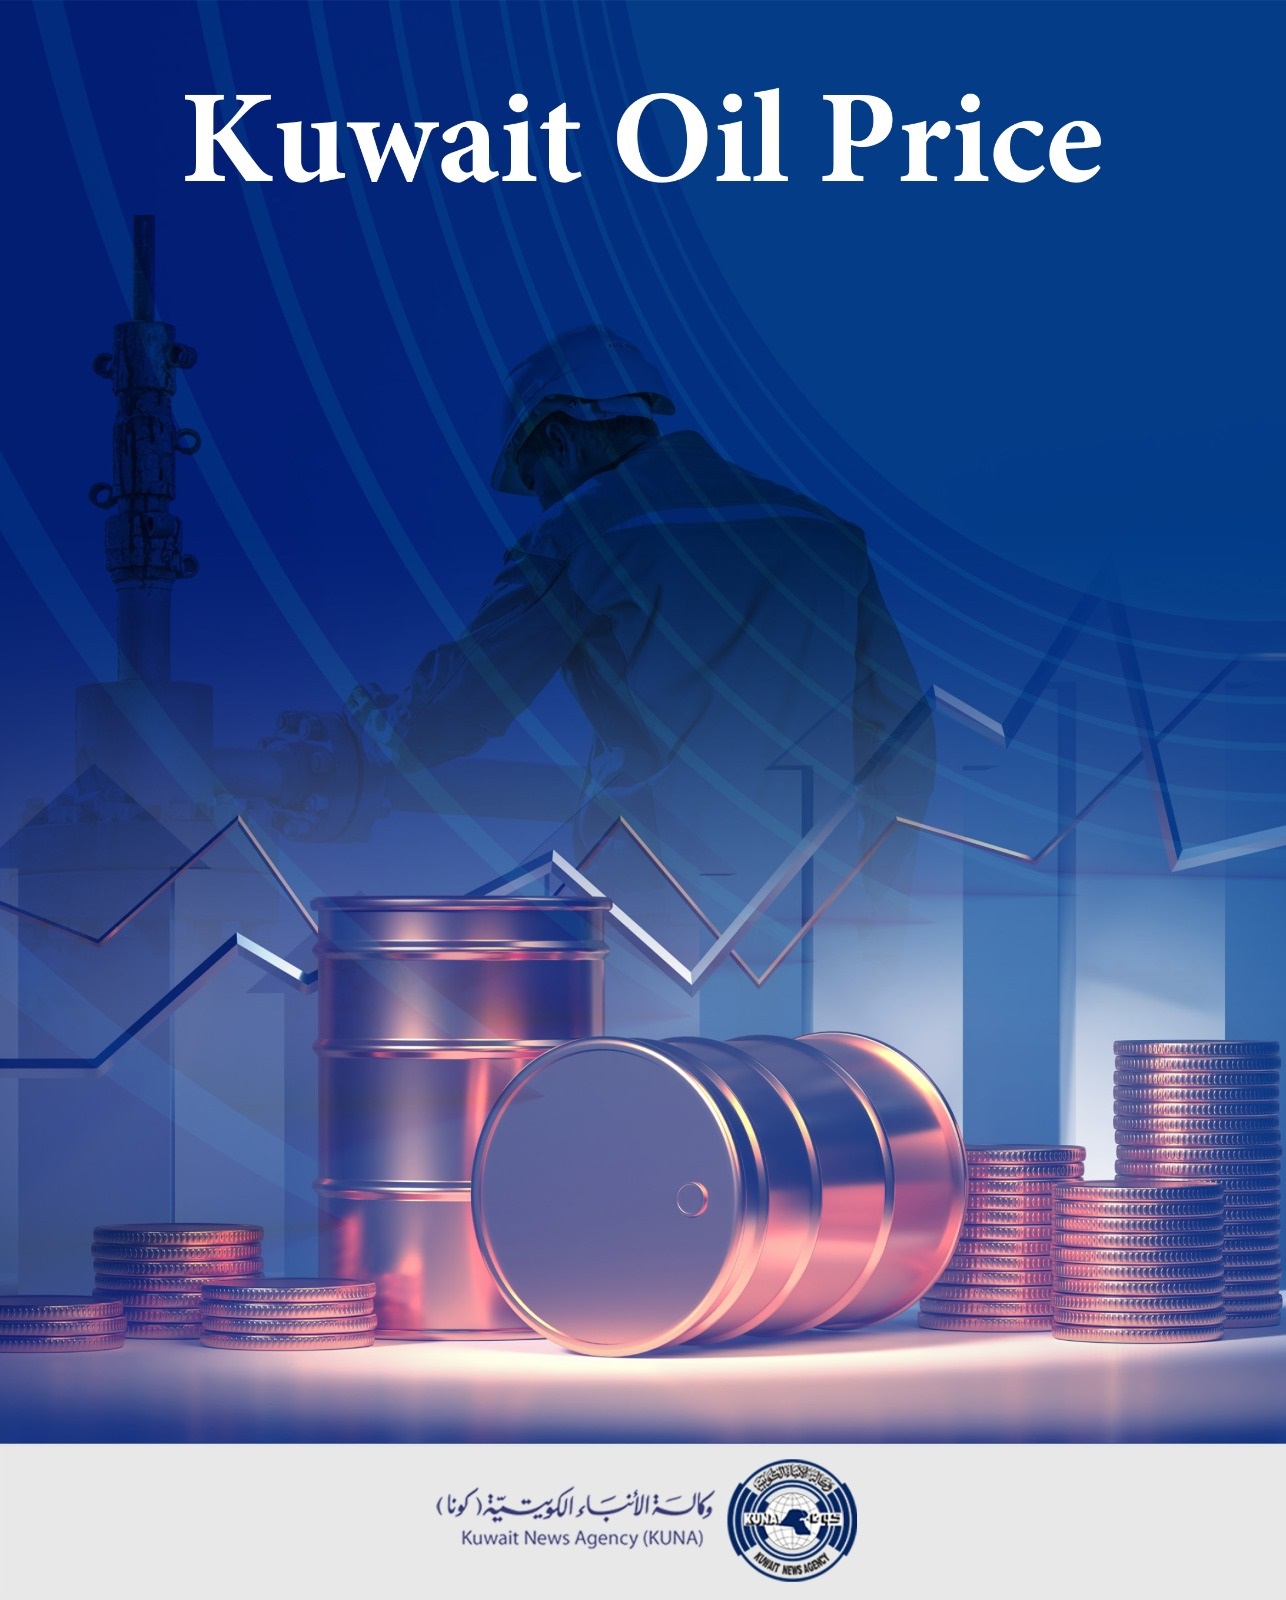 Kuwait oil price up 21 cents to USD 84.56 pb                                                                                                                                                                                                              